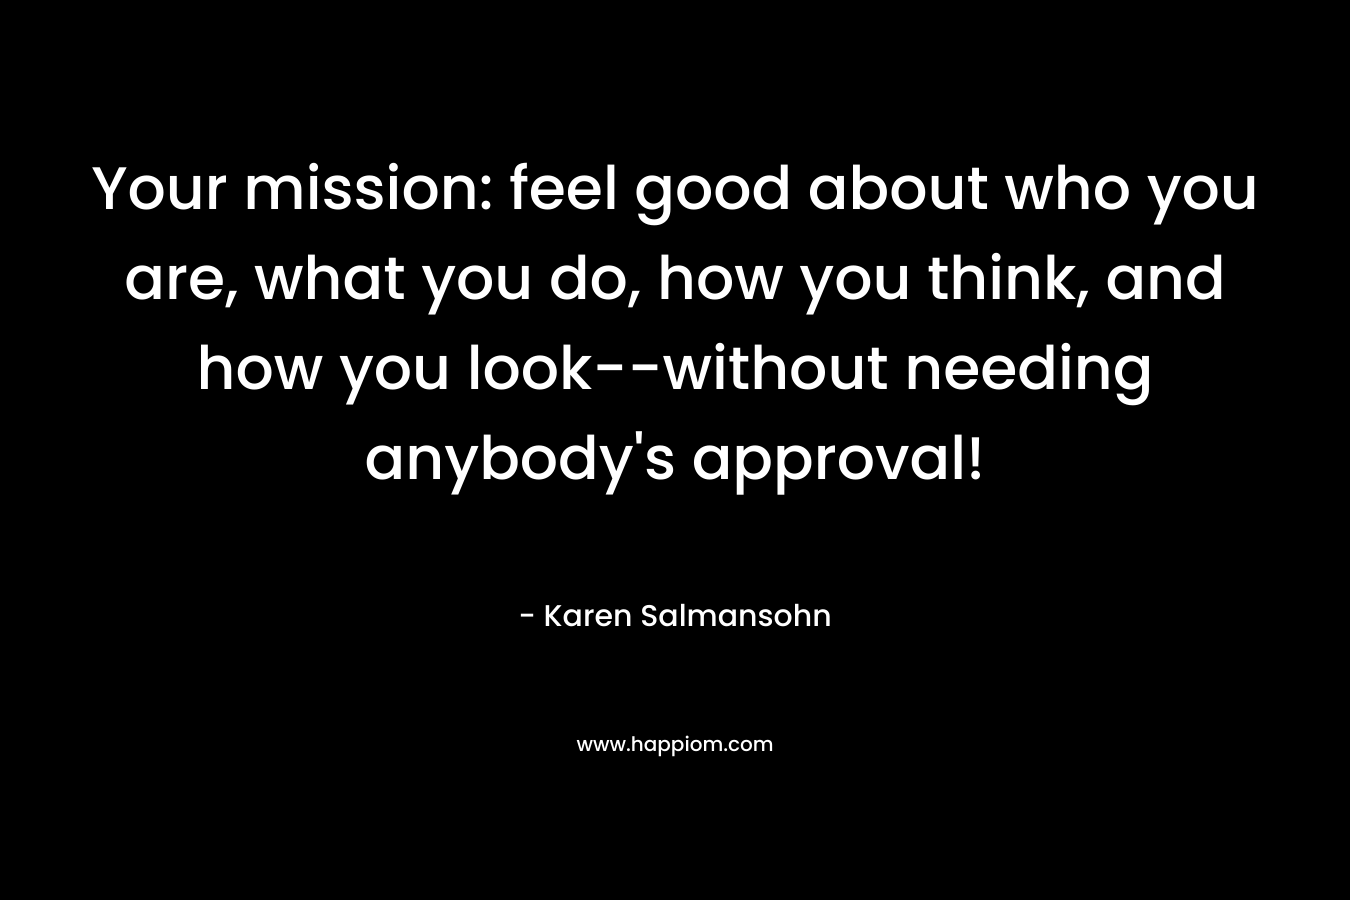 Your mission: feel good about who you are, what you do, how you think, and how you look--without needing anybody's approval!